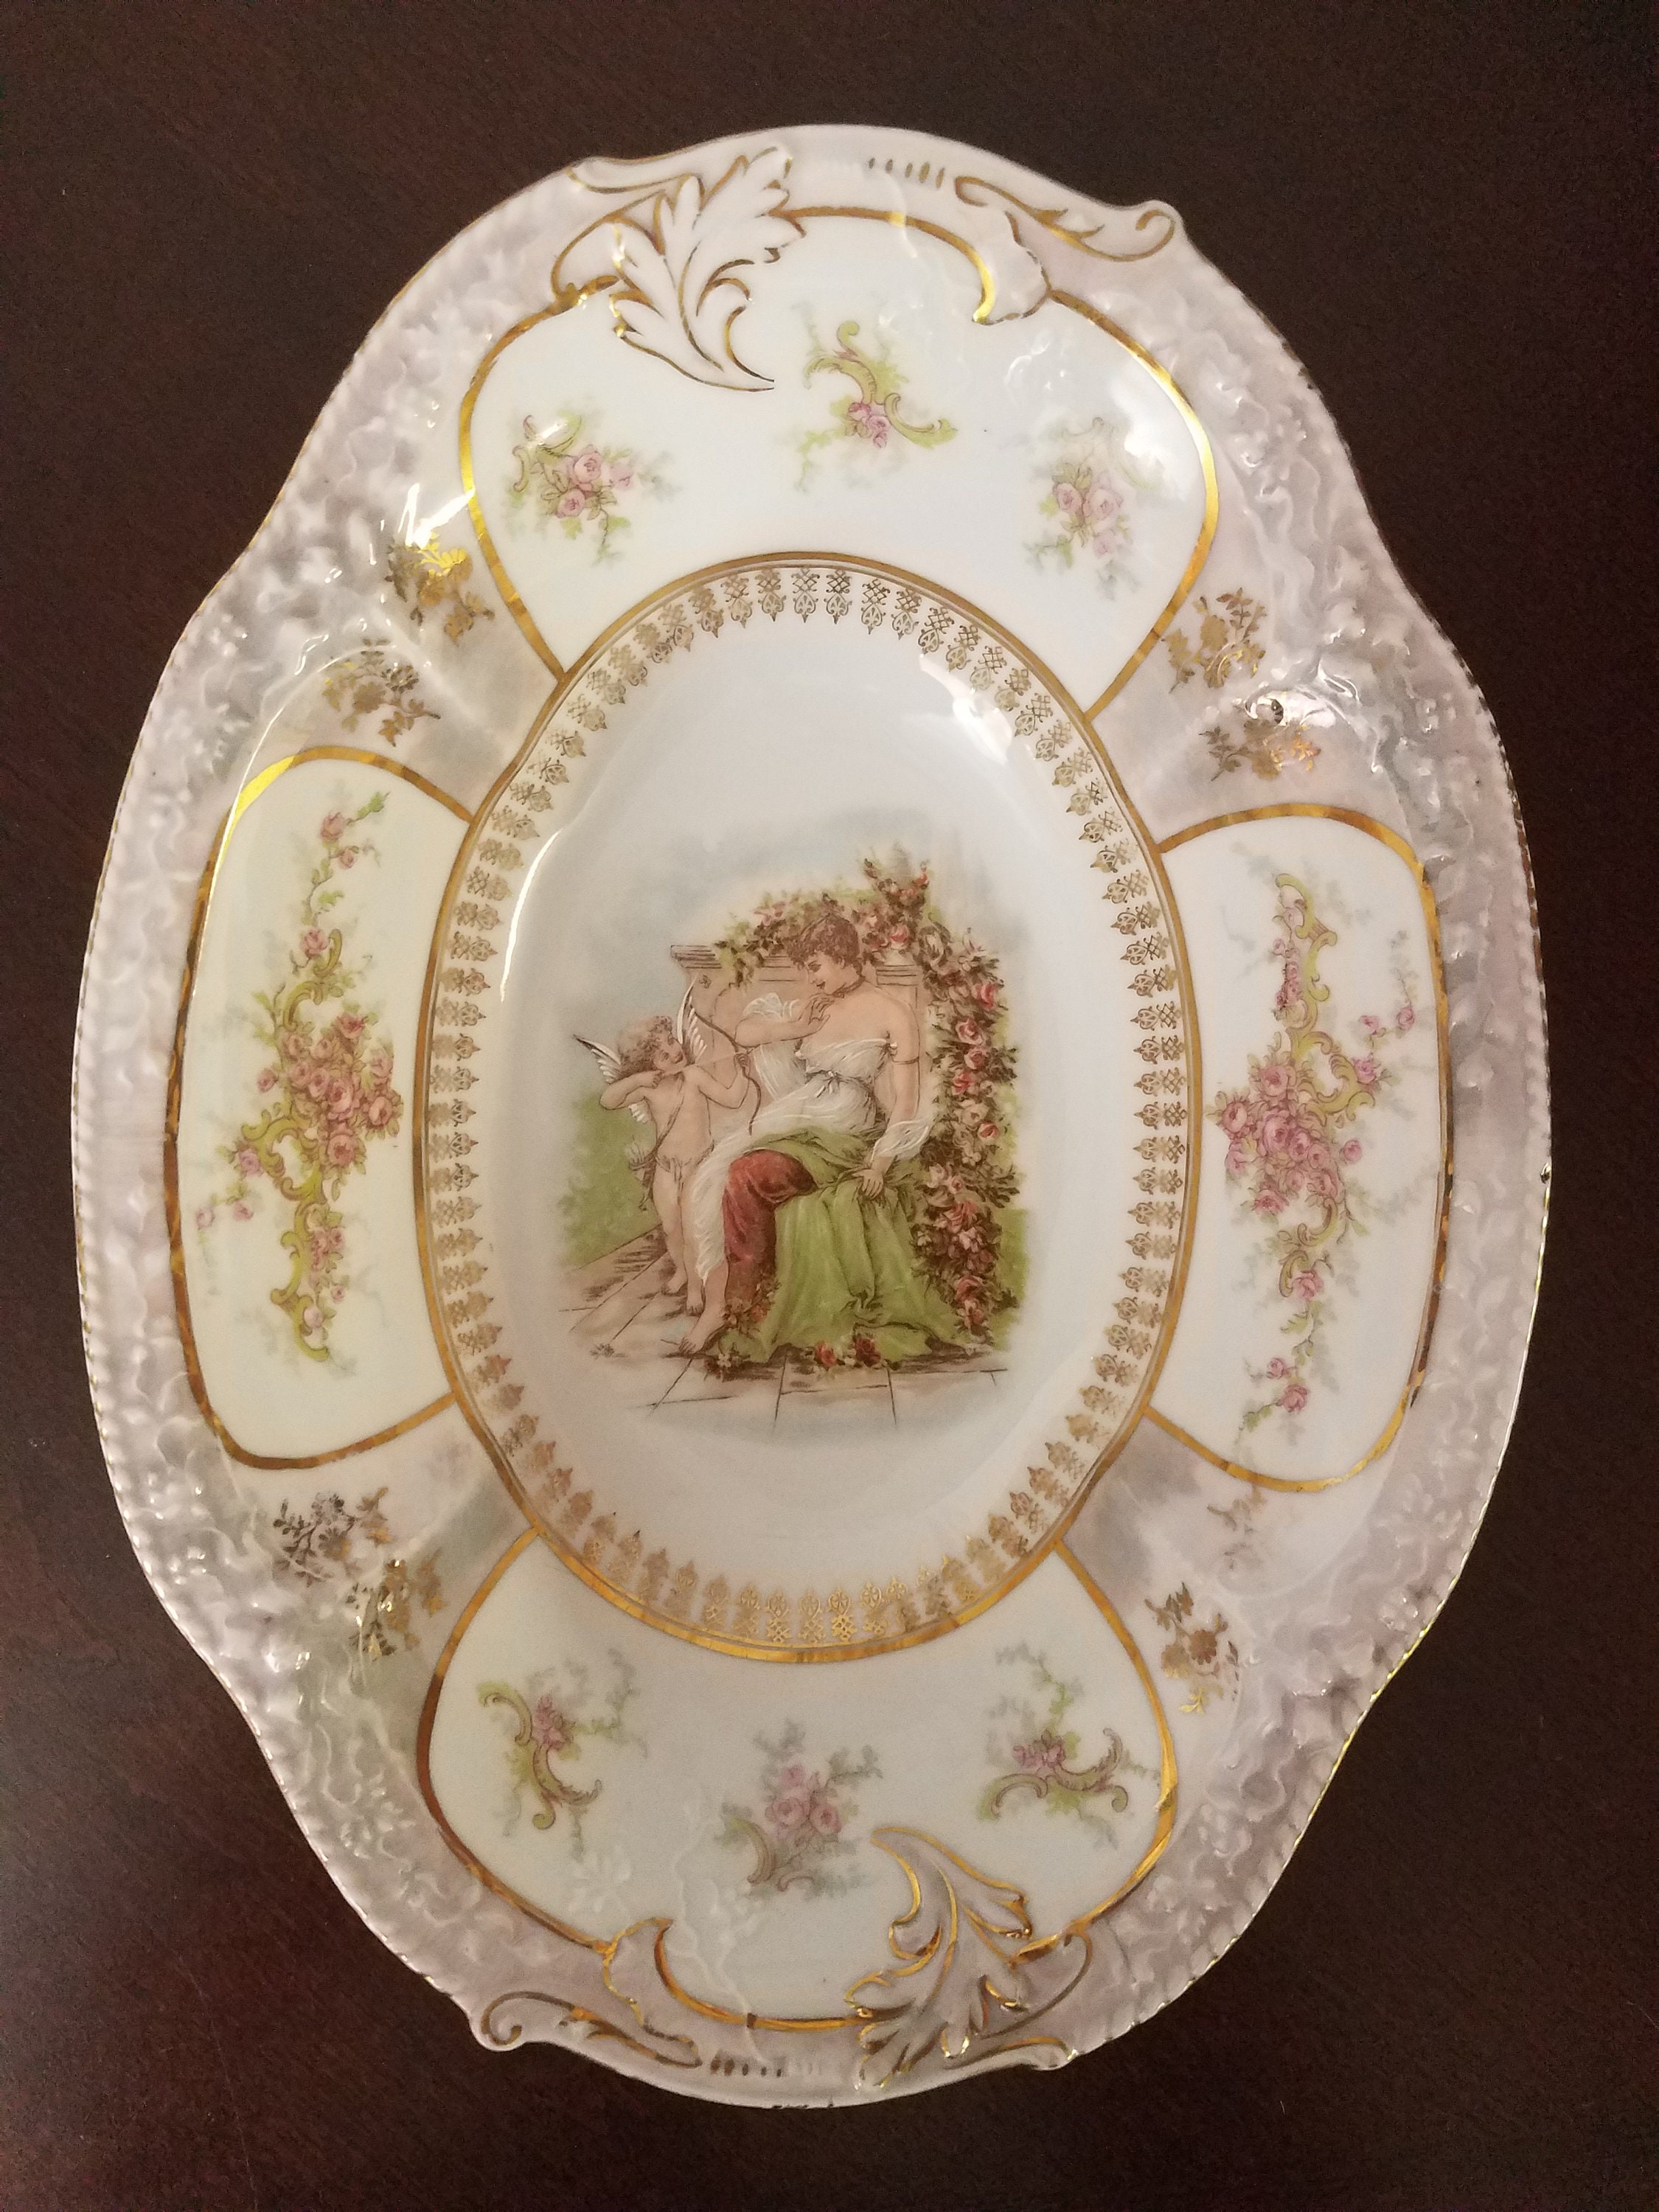 Z. S. & Co Bavaria 1880-1918 Porcelain Bowl With an Image of Cupid Aiming  an Arrow at a Young Woman\'s Heart Zeh Scherzer - Etsy